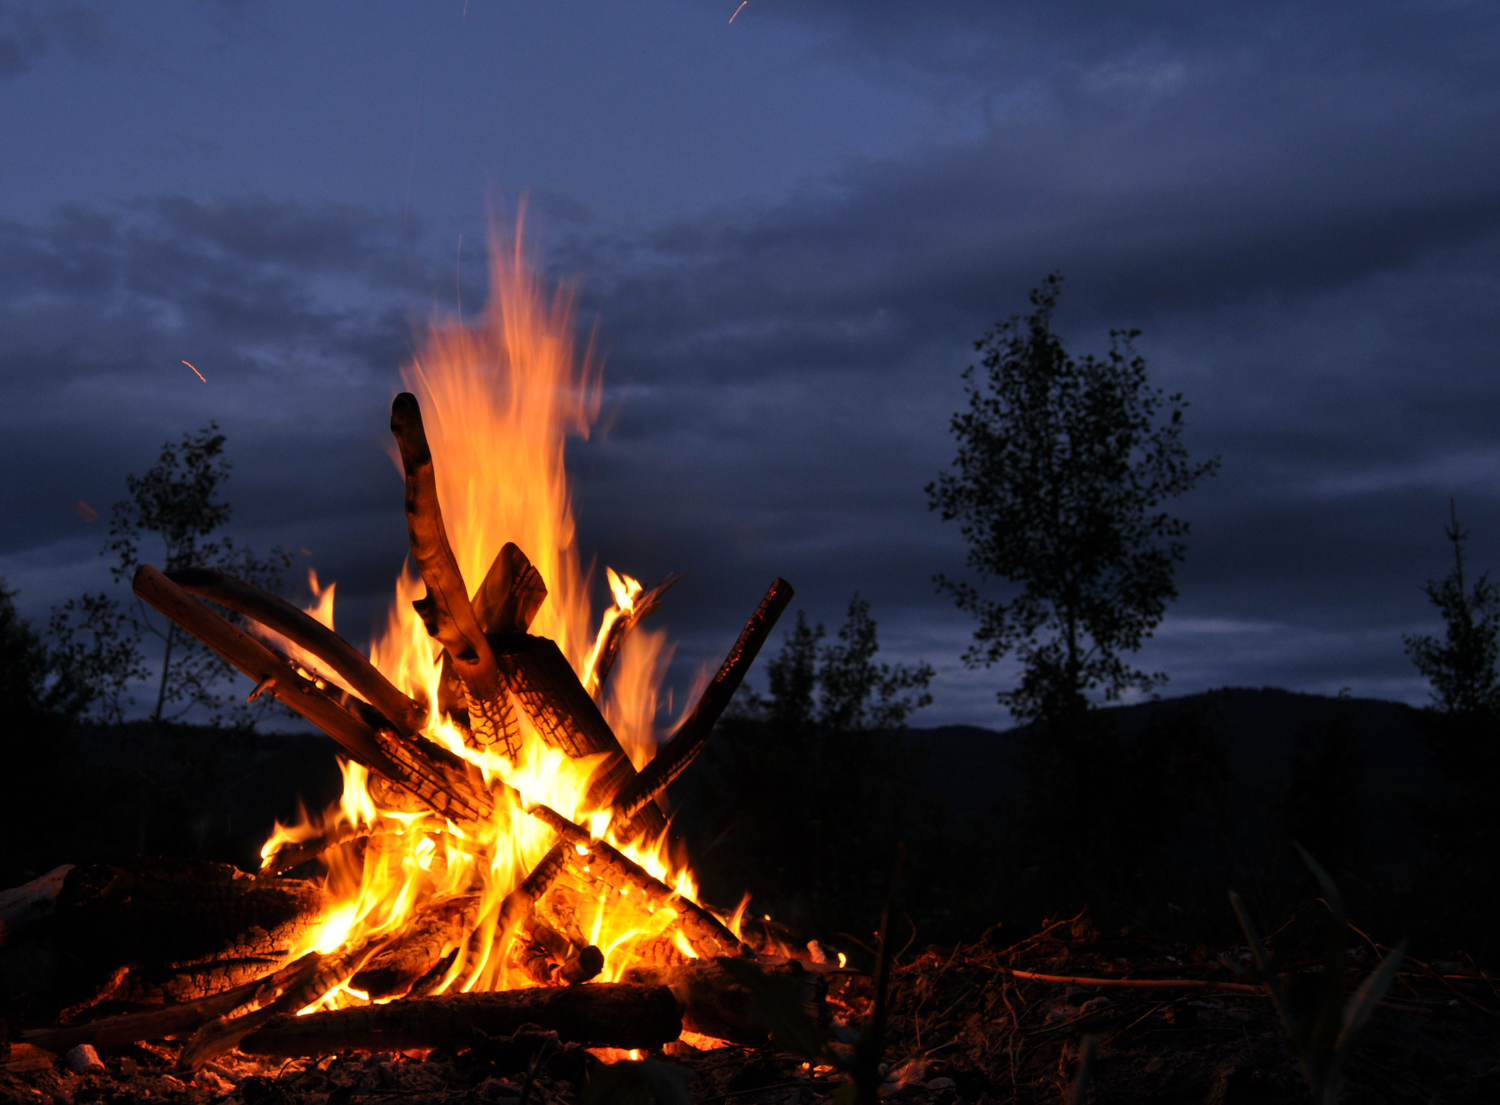 A big bright campfire burning at night in a forest